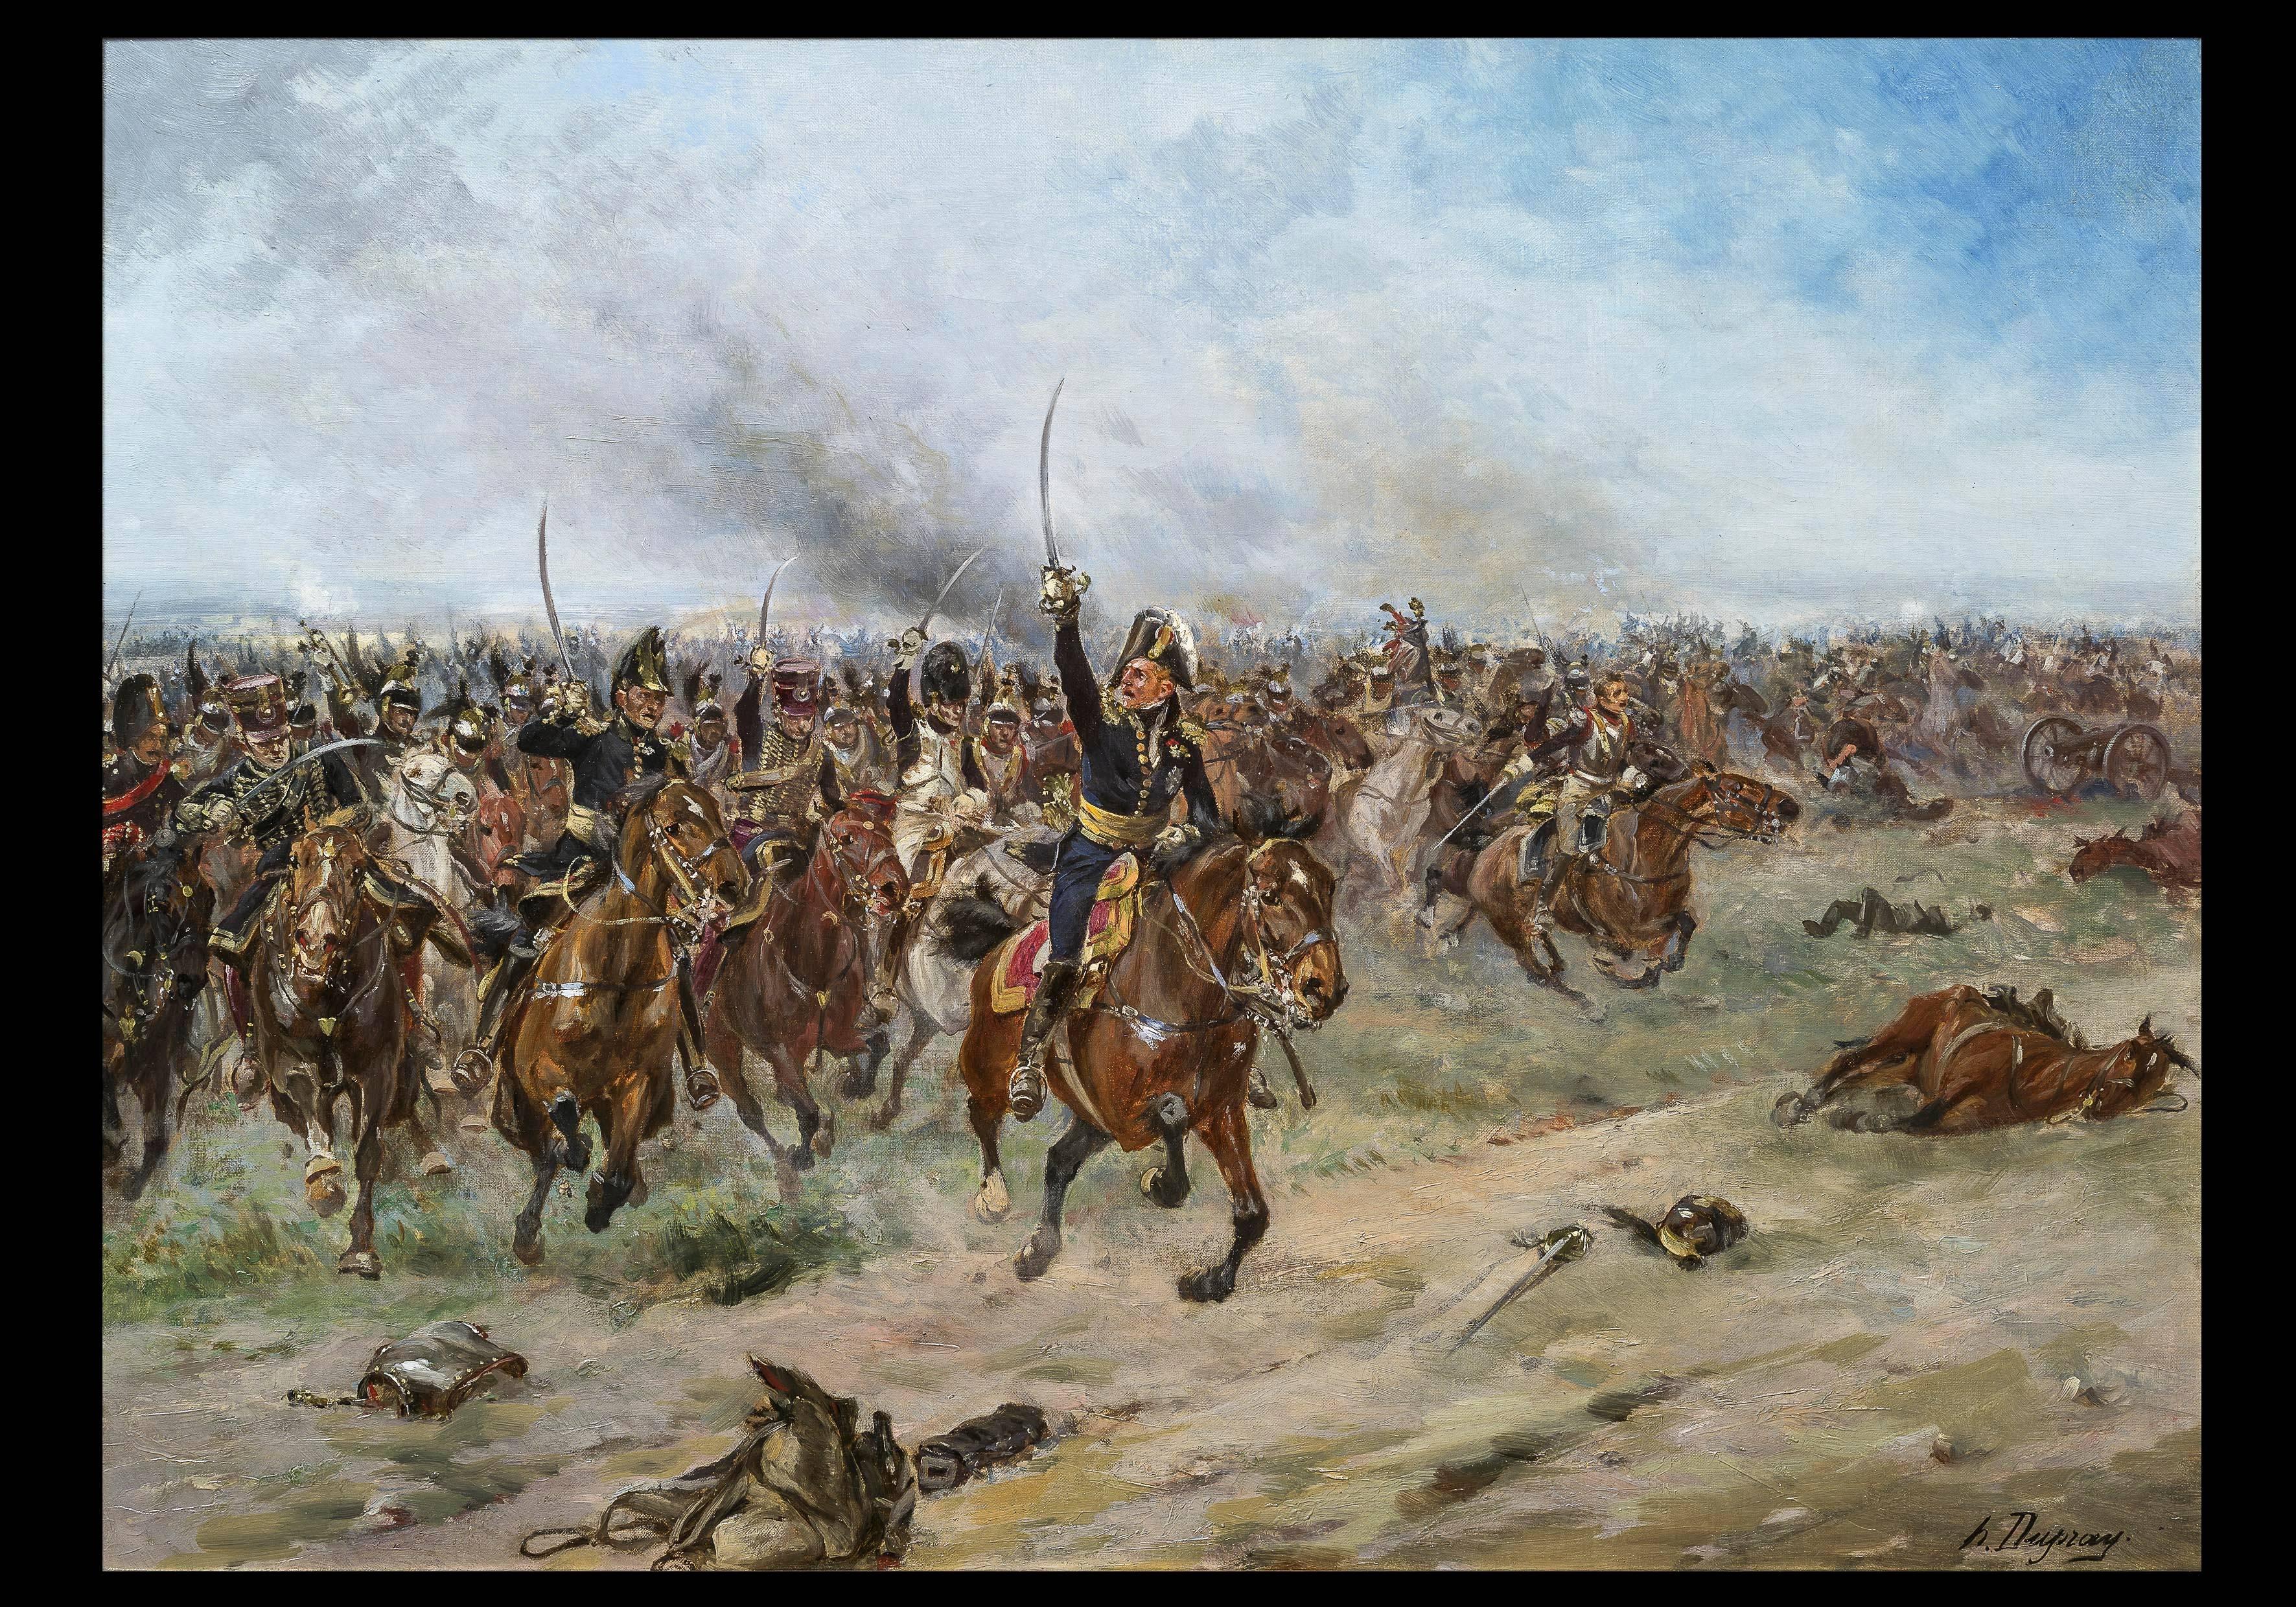 Le Marechal Ney Chargeant à Waterloo (Marshall Ney charging at Waterloo Battle) - Painting by Henry Louis Dupray 